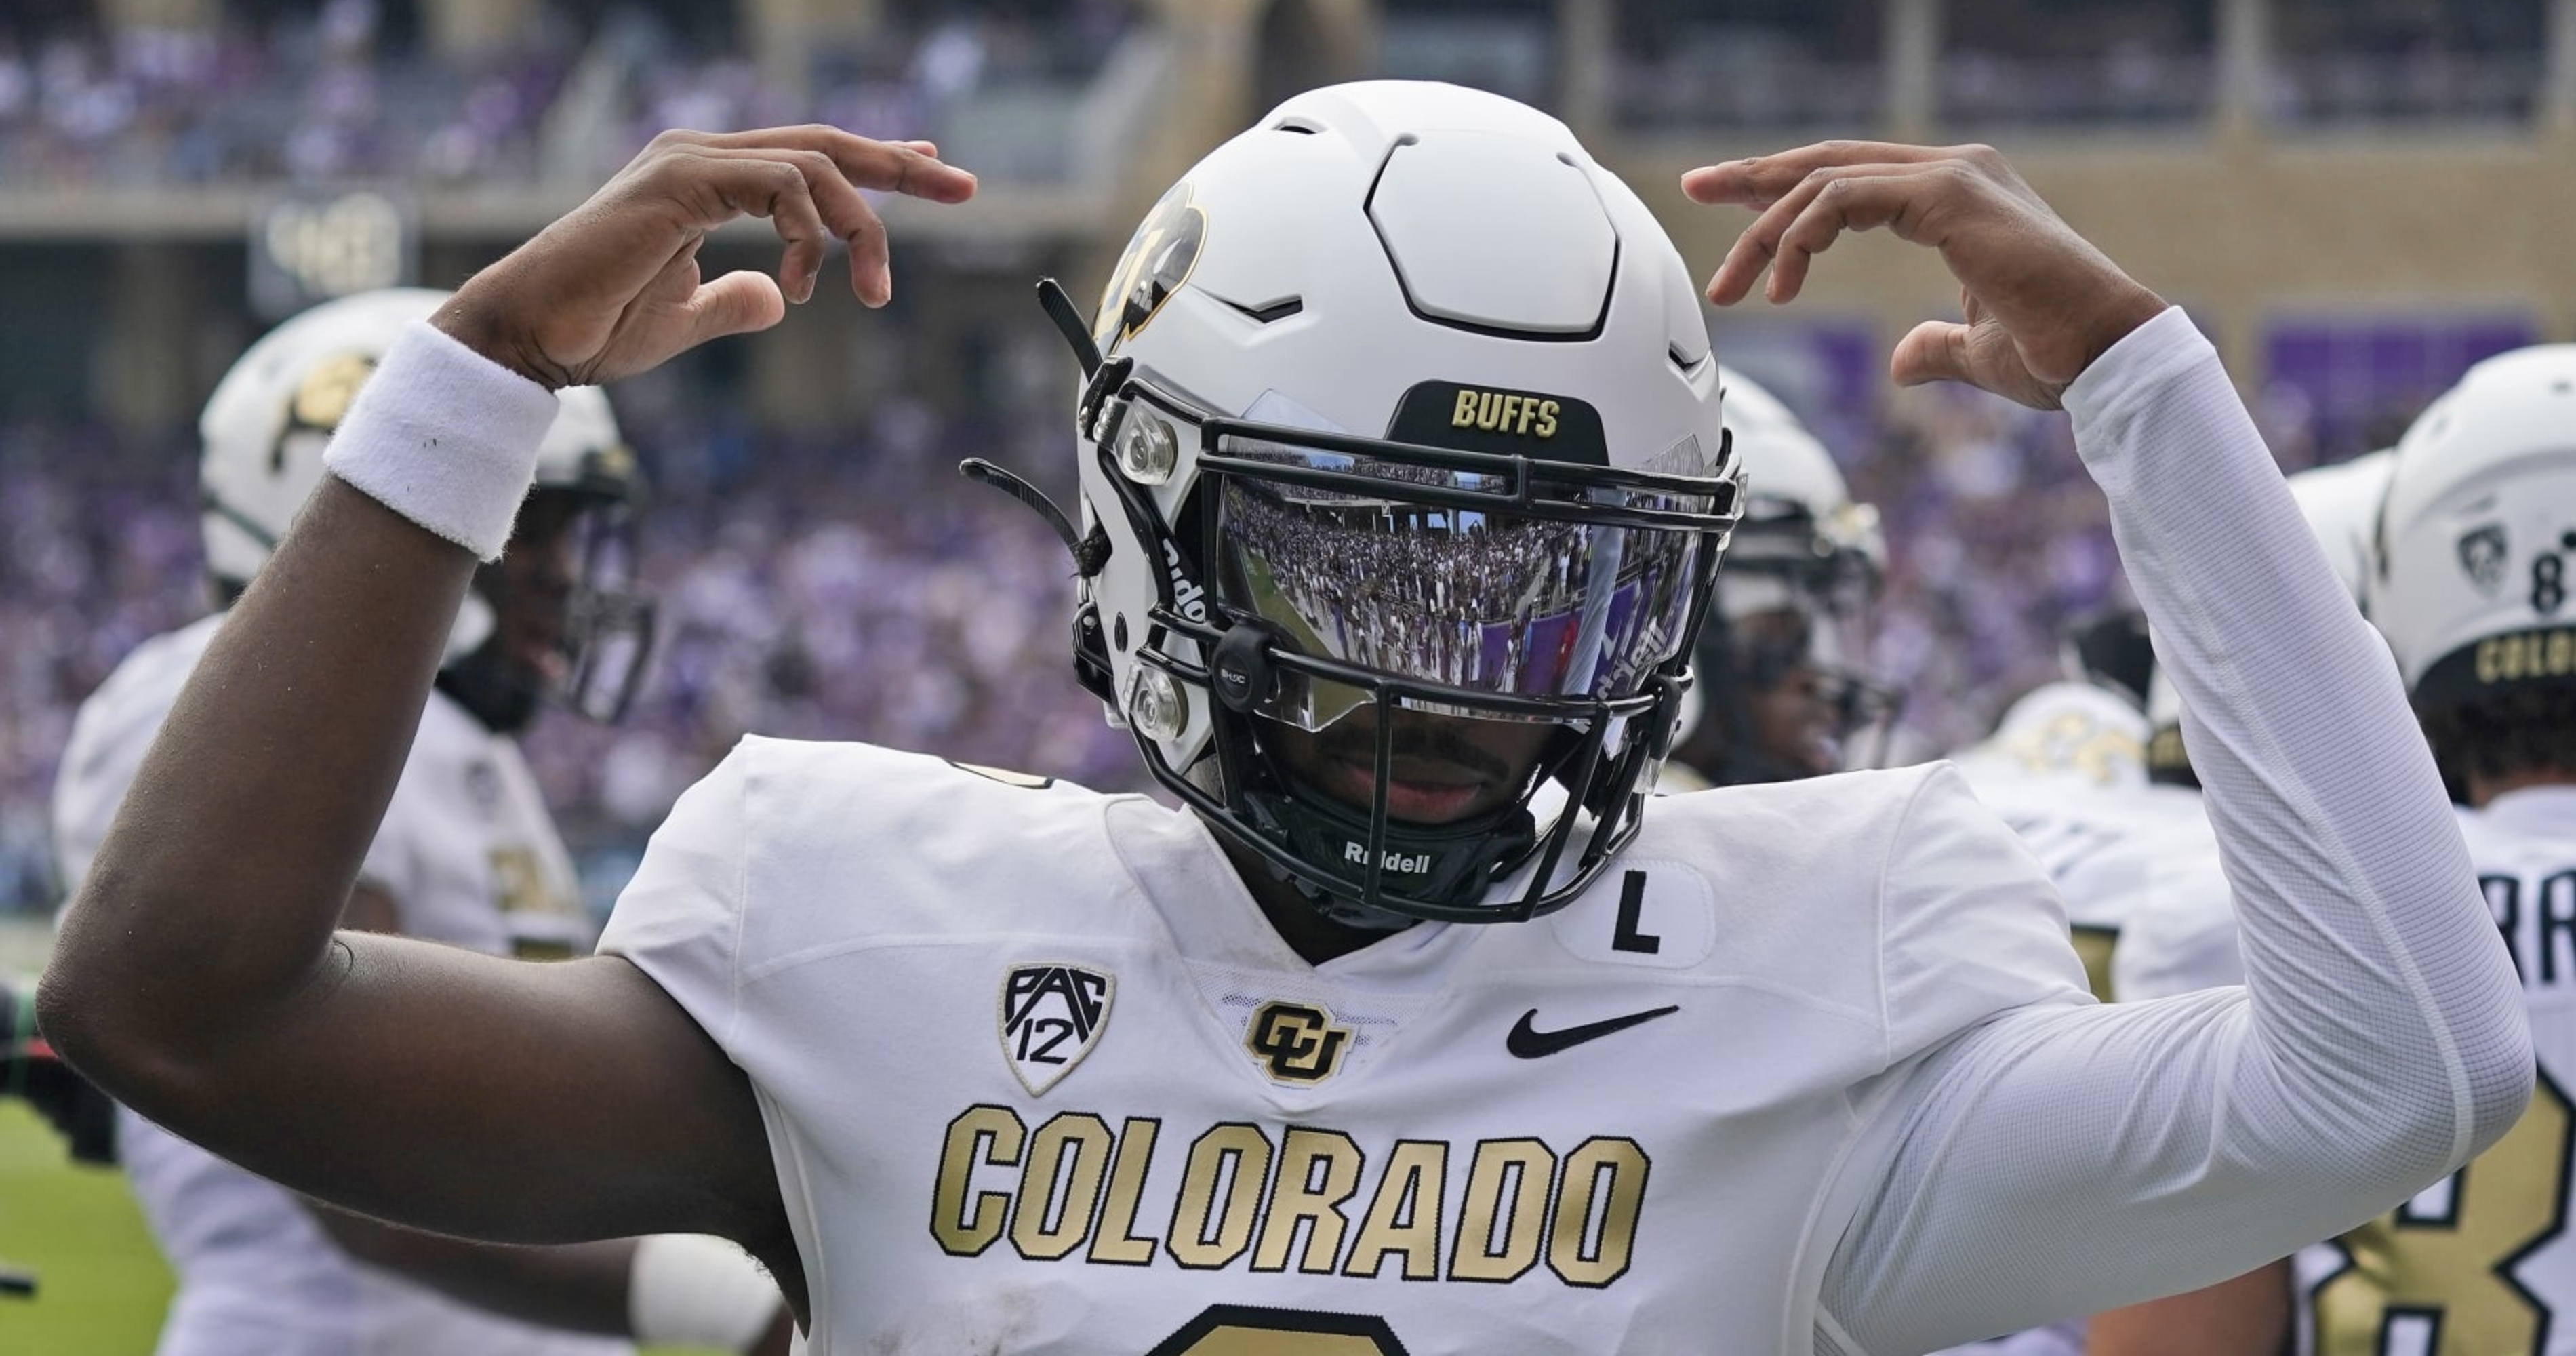 Coach Prime debuts new white and gold uniforms in Colorado debut